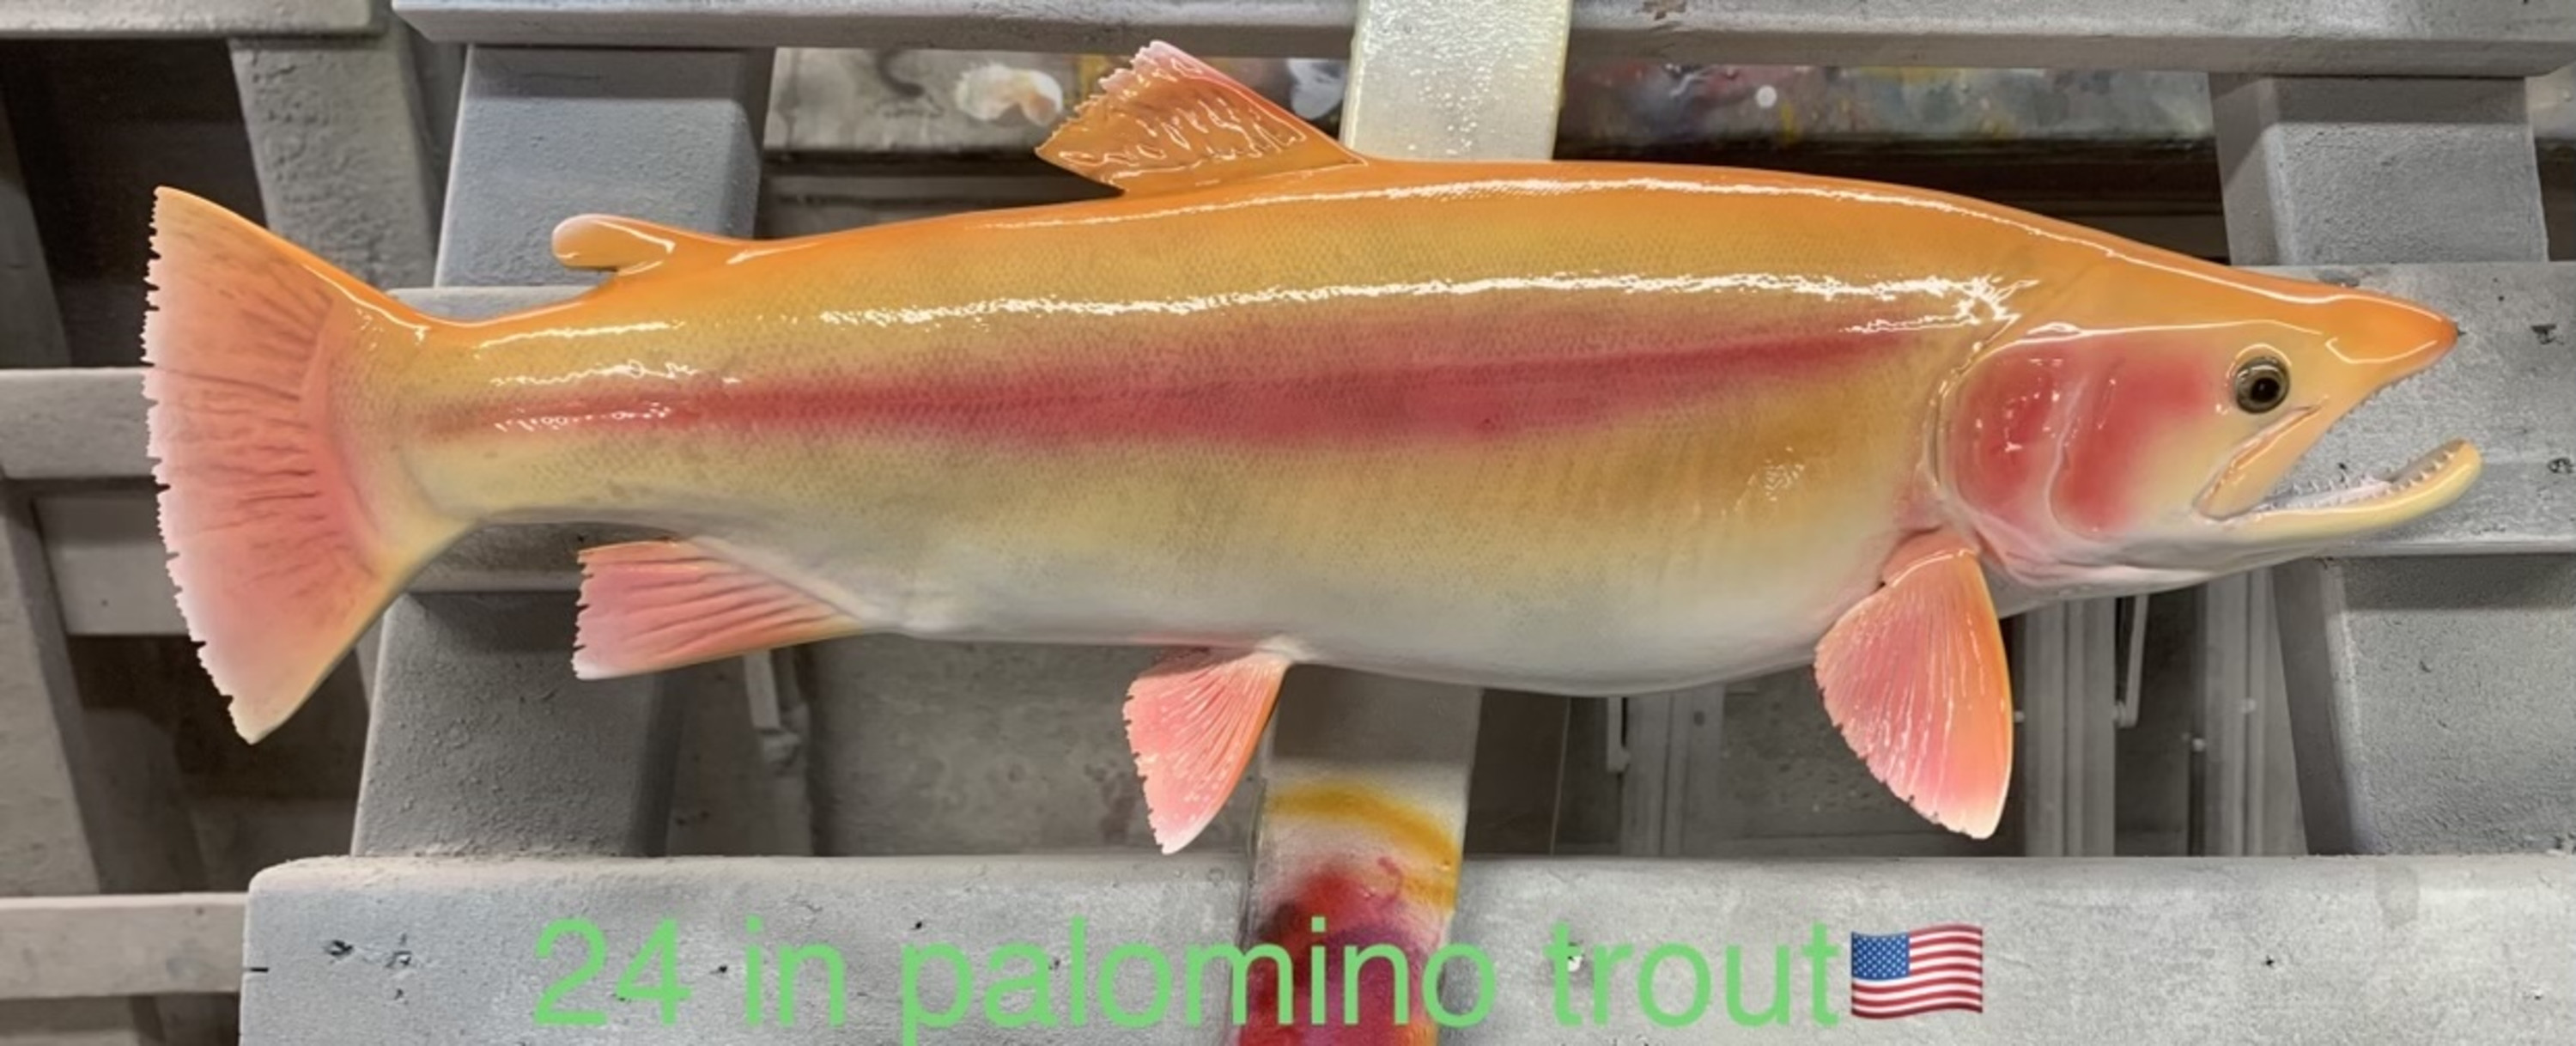 Golden Trout Fish Mounts & Replicas by Coast-to-Coast Fish Mounts